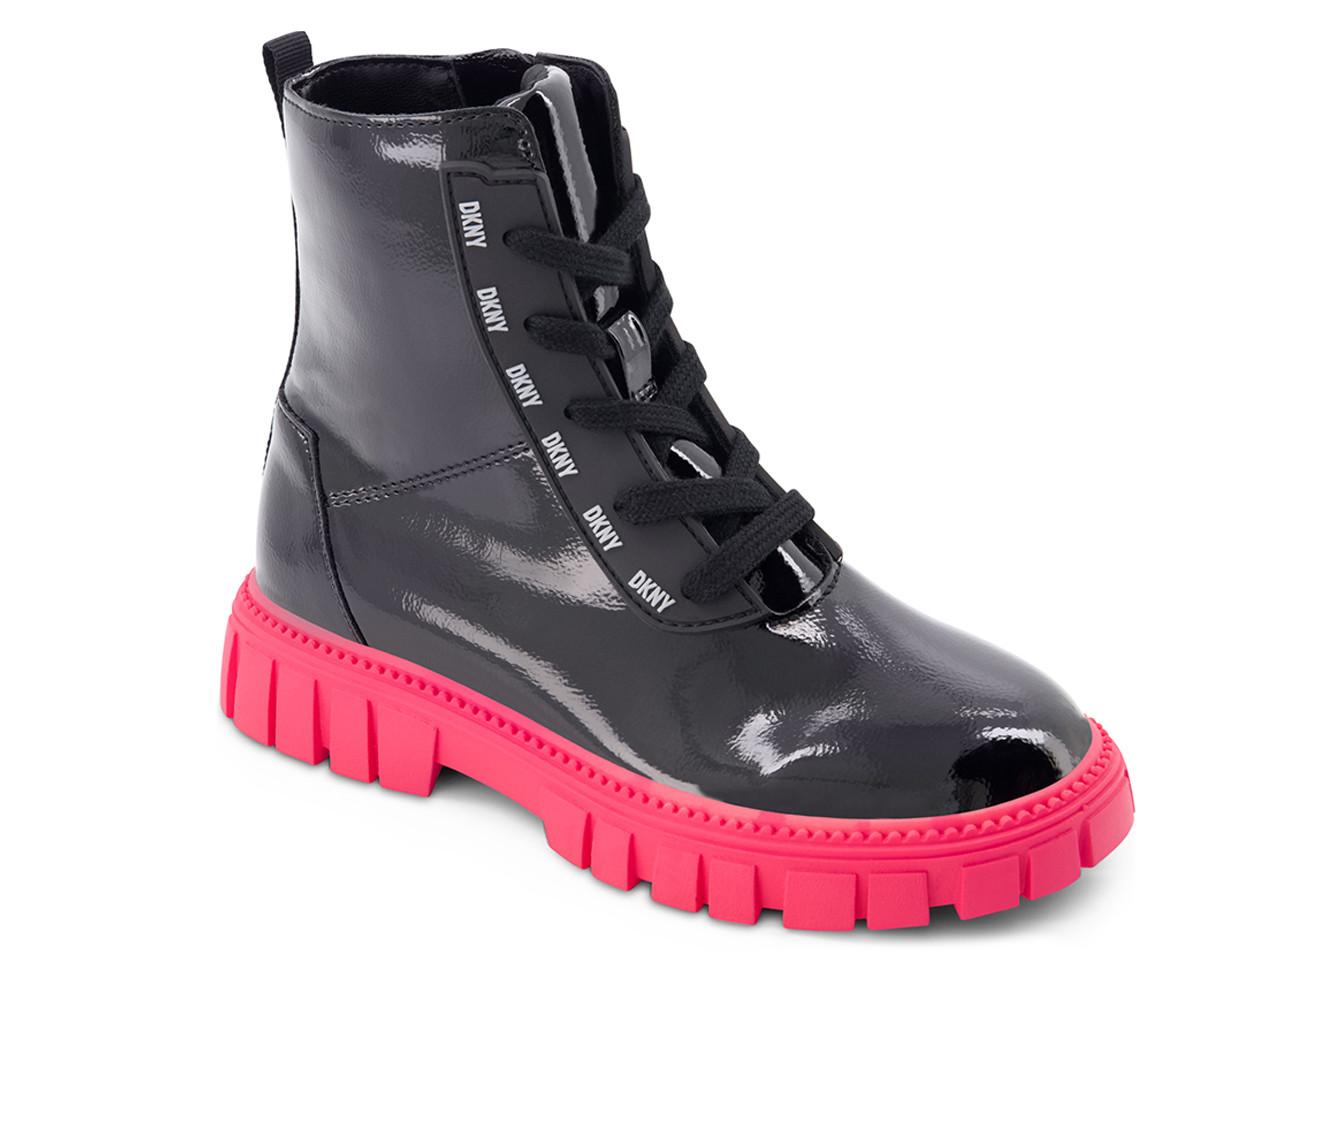 Girls' DKNY Toddler Carrie Combat Boots